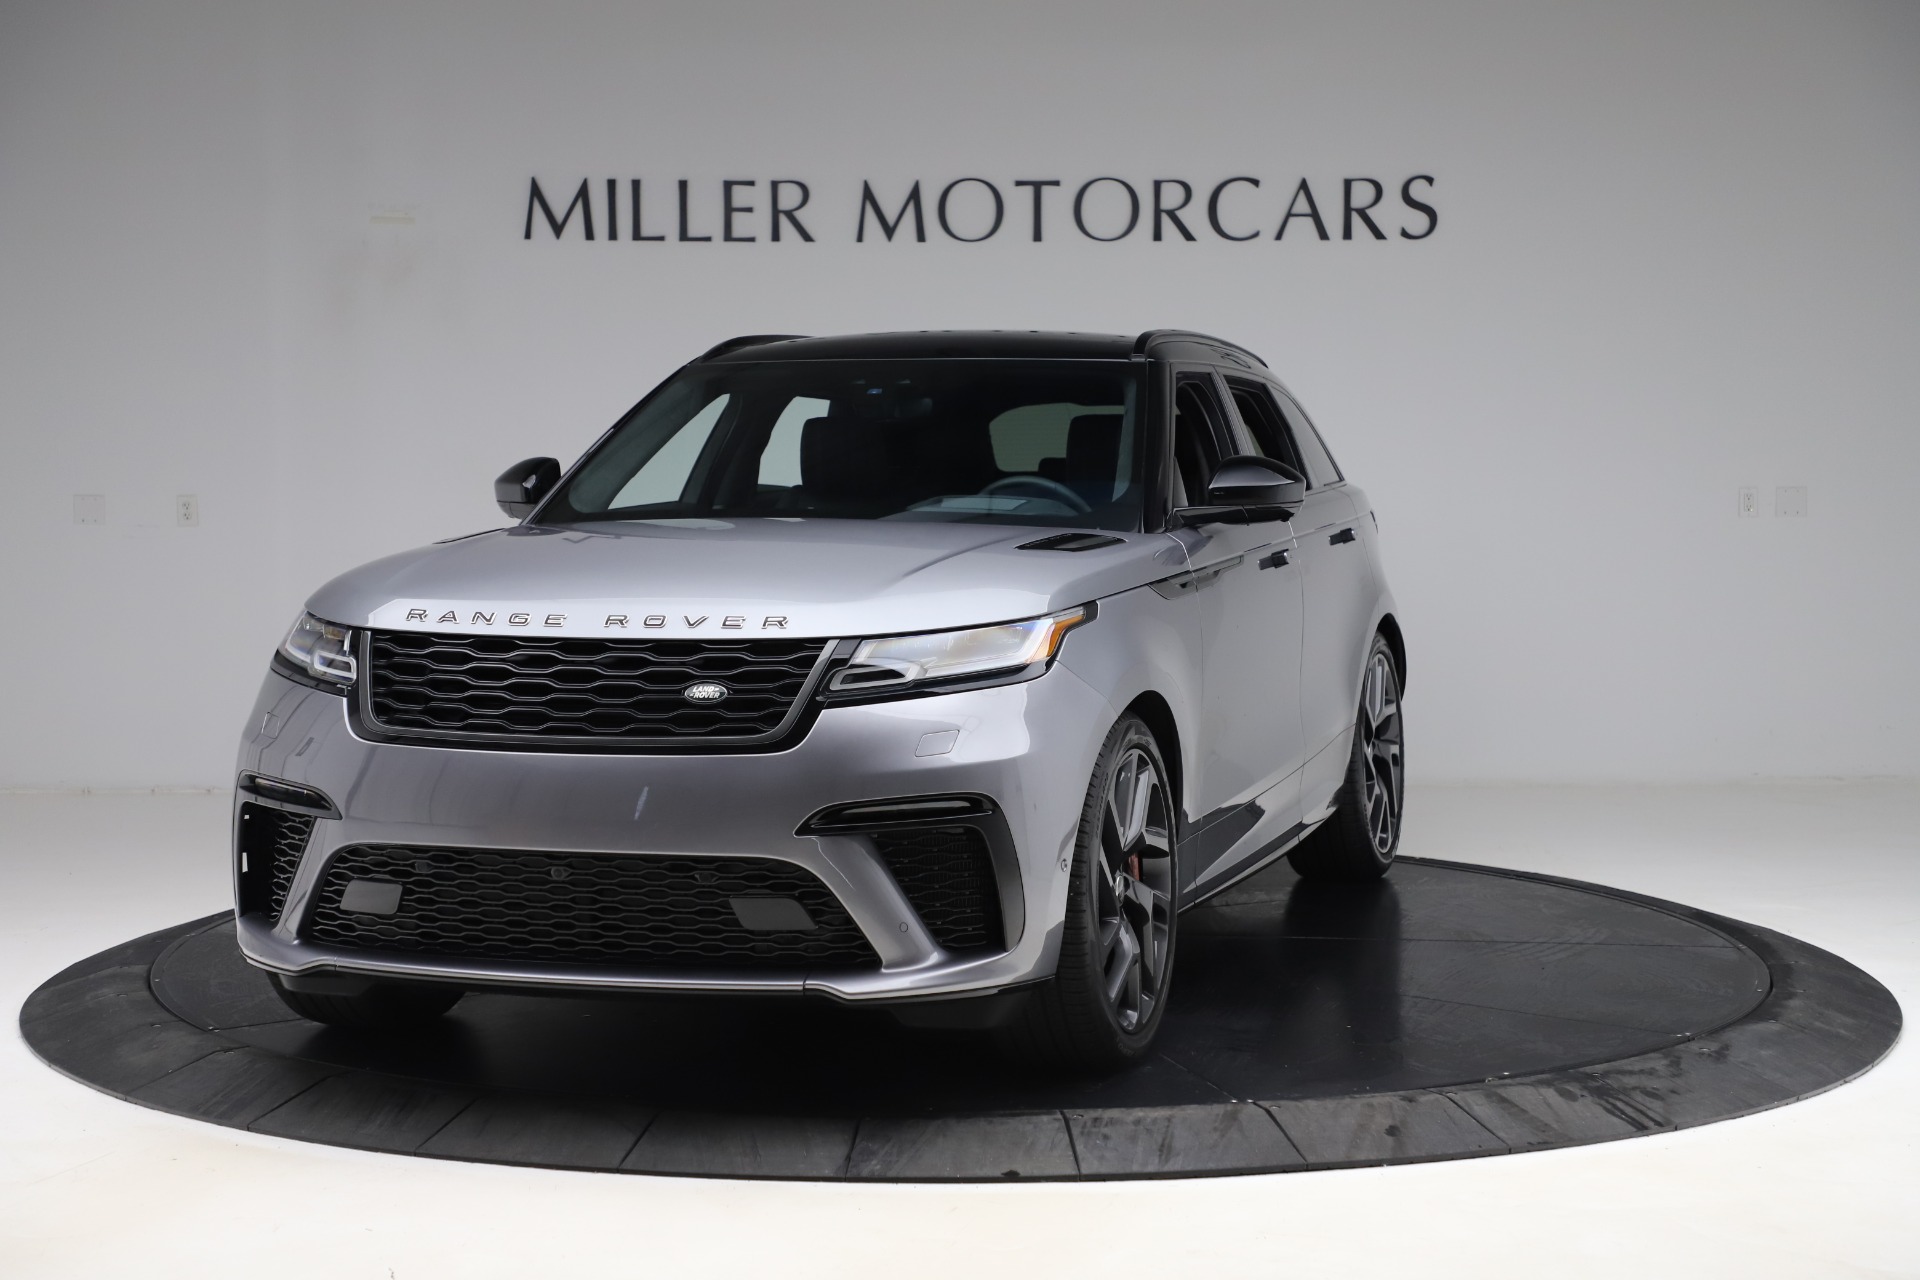 Used 2020 Land Rover Range Rover Velar SVAutobiography Dynamic Edition for sale Sold at Aston Martin of Greenwich in Greenwich CT 06830 1